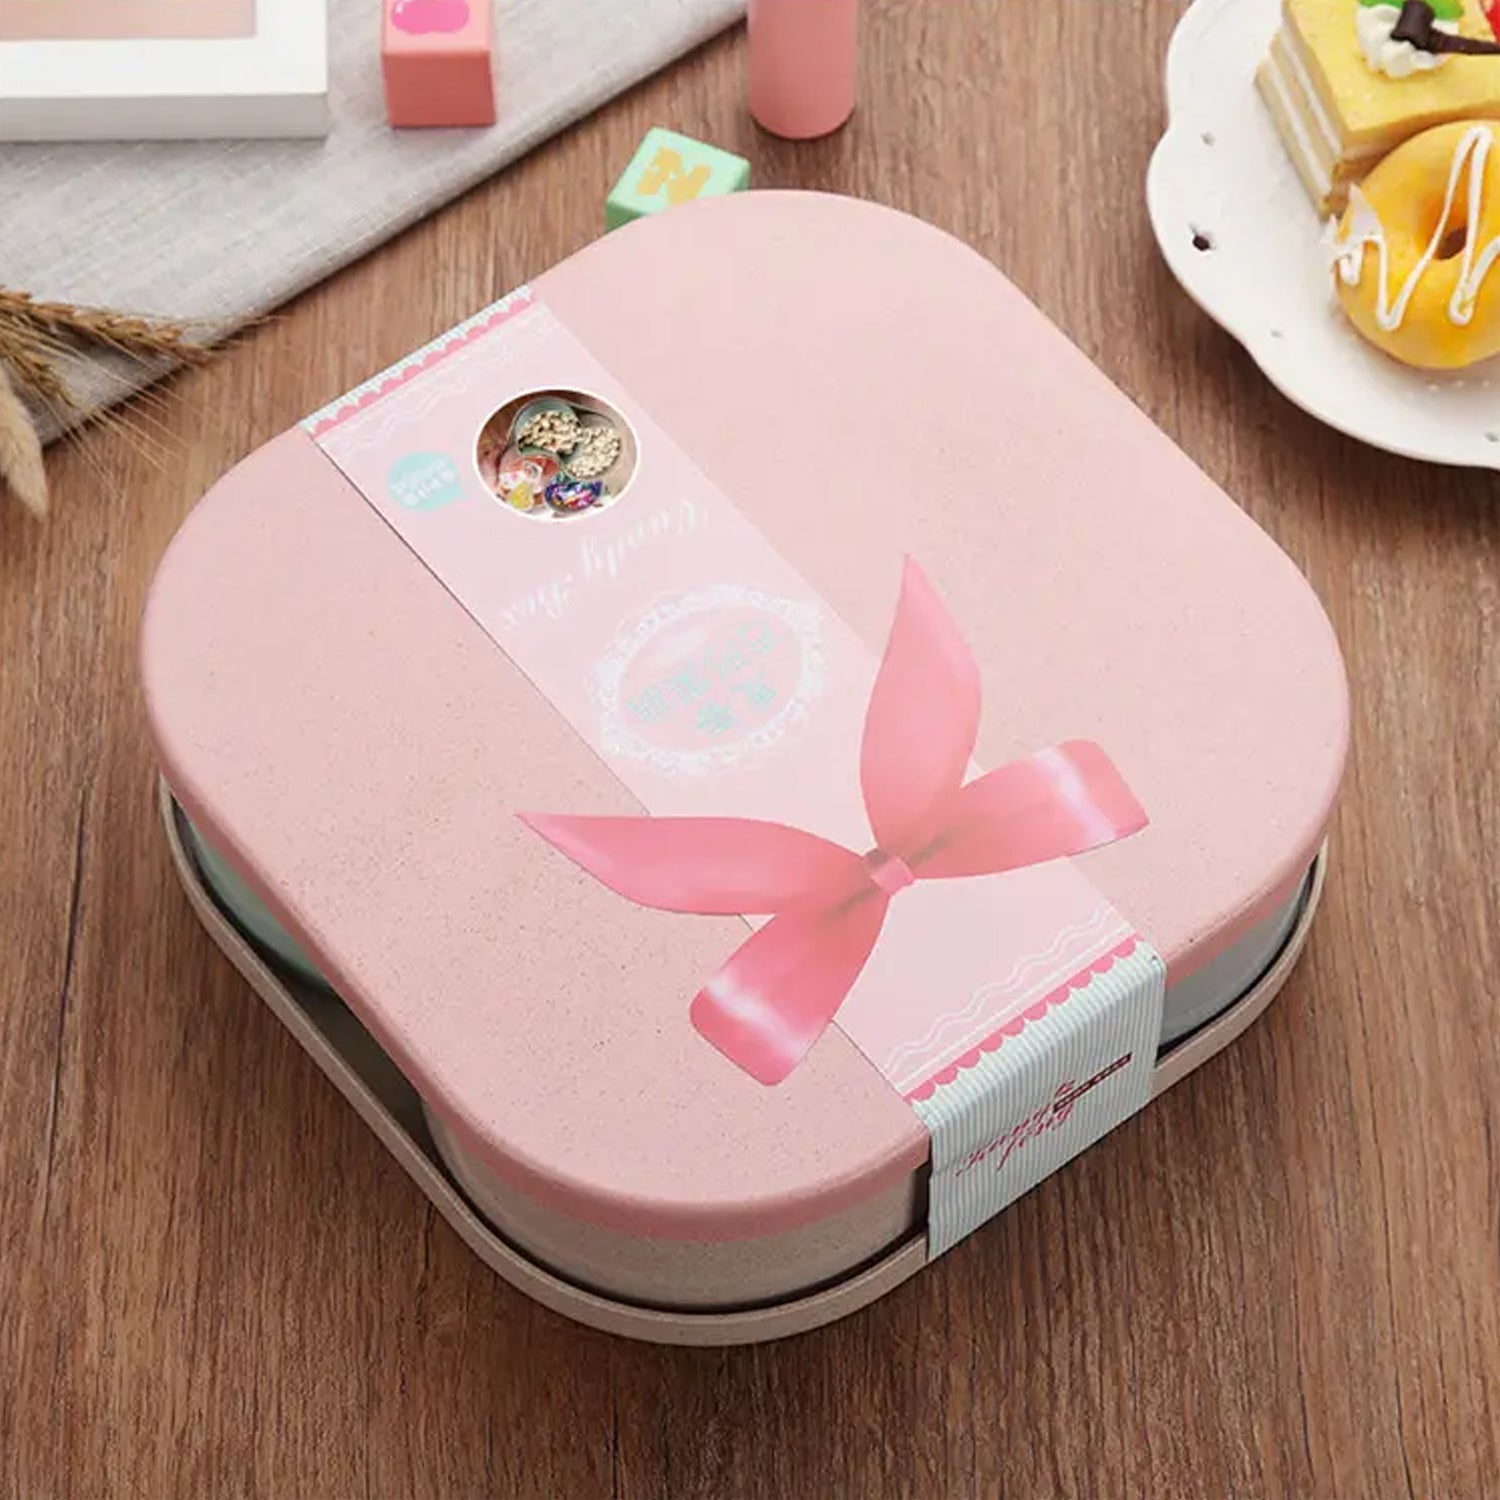 7151 Candy Box Large Capacity Space-saving Compartment Design Creative Divided Food Fruit Plate for Living Roomfruit_candy_box_4comp DeoDap